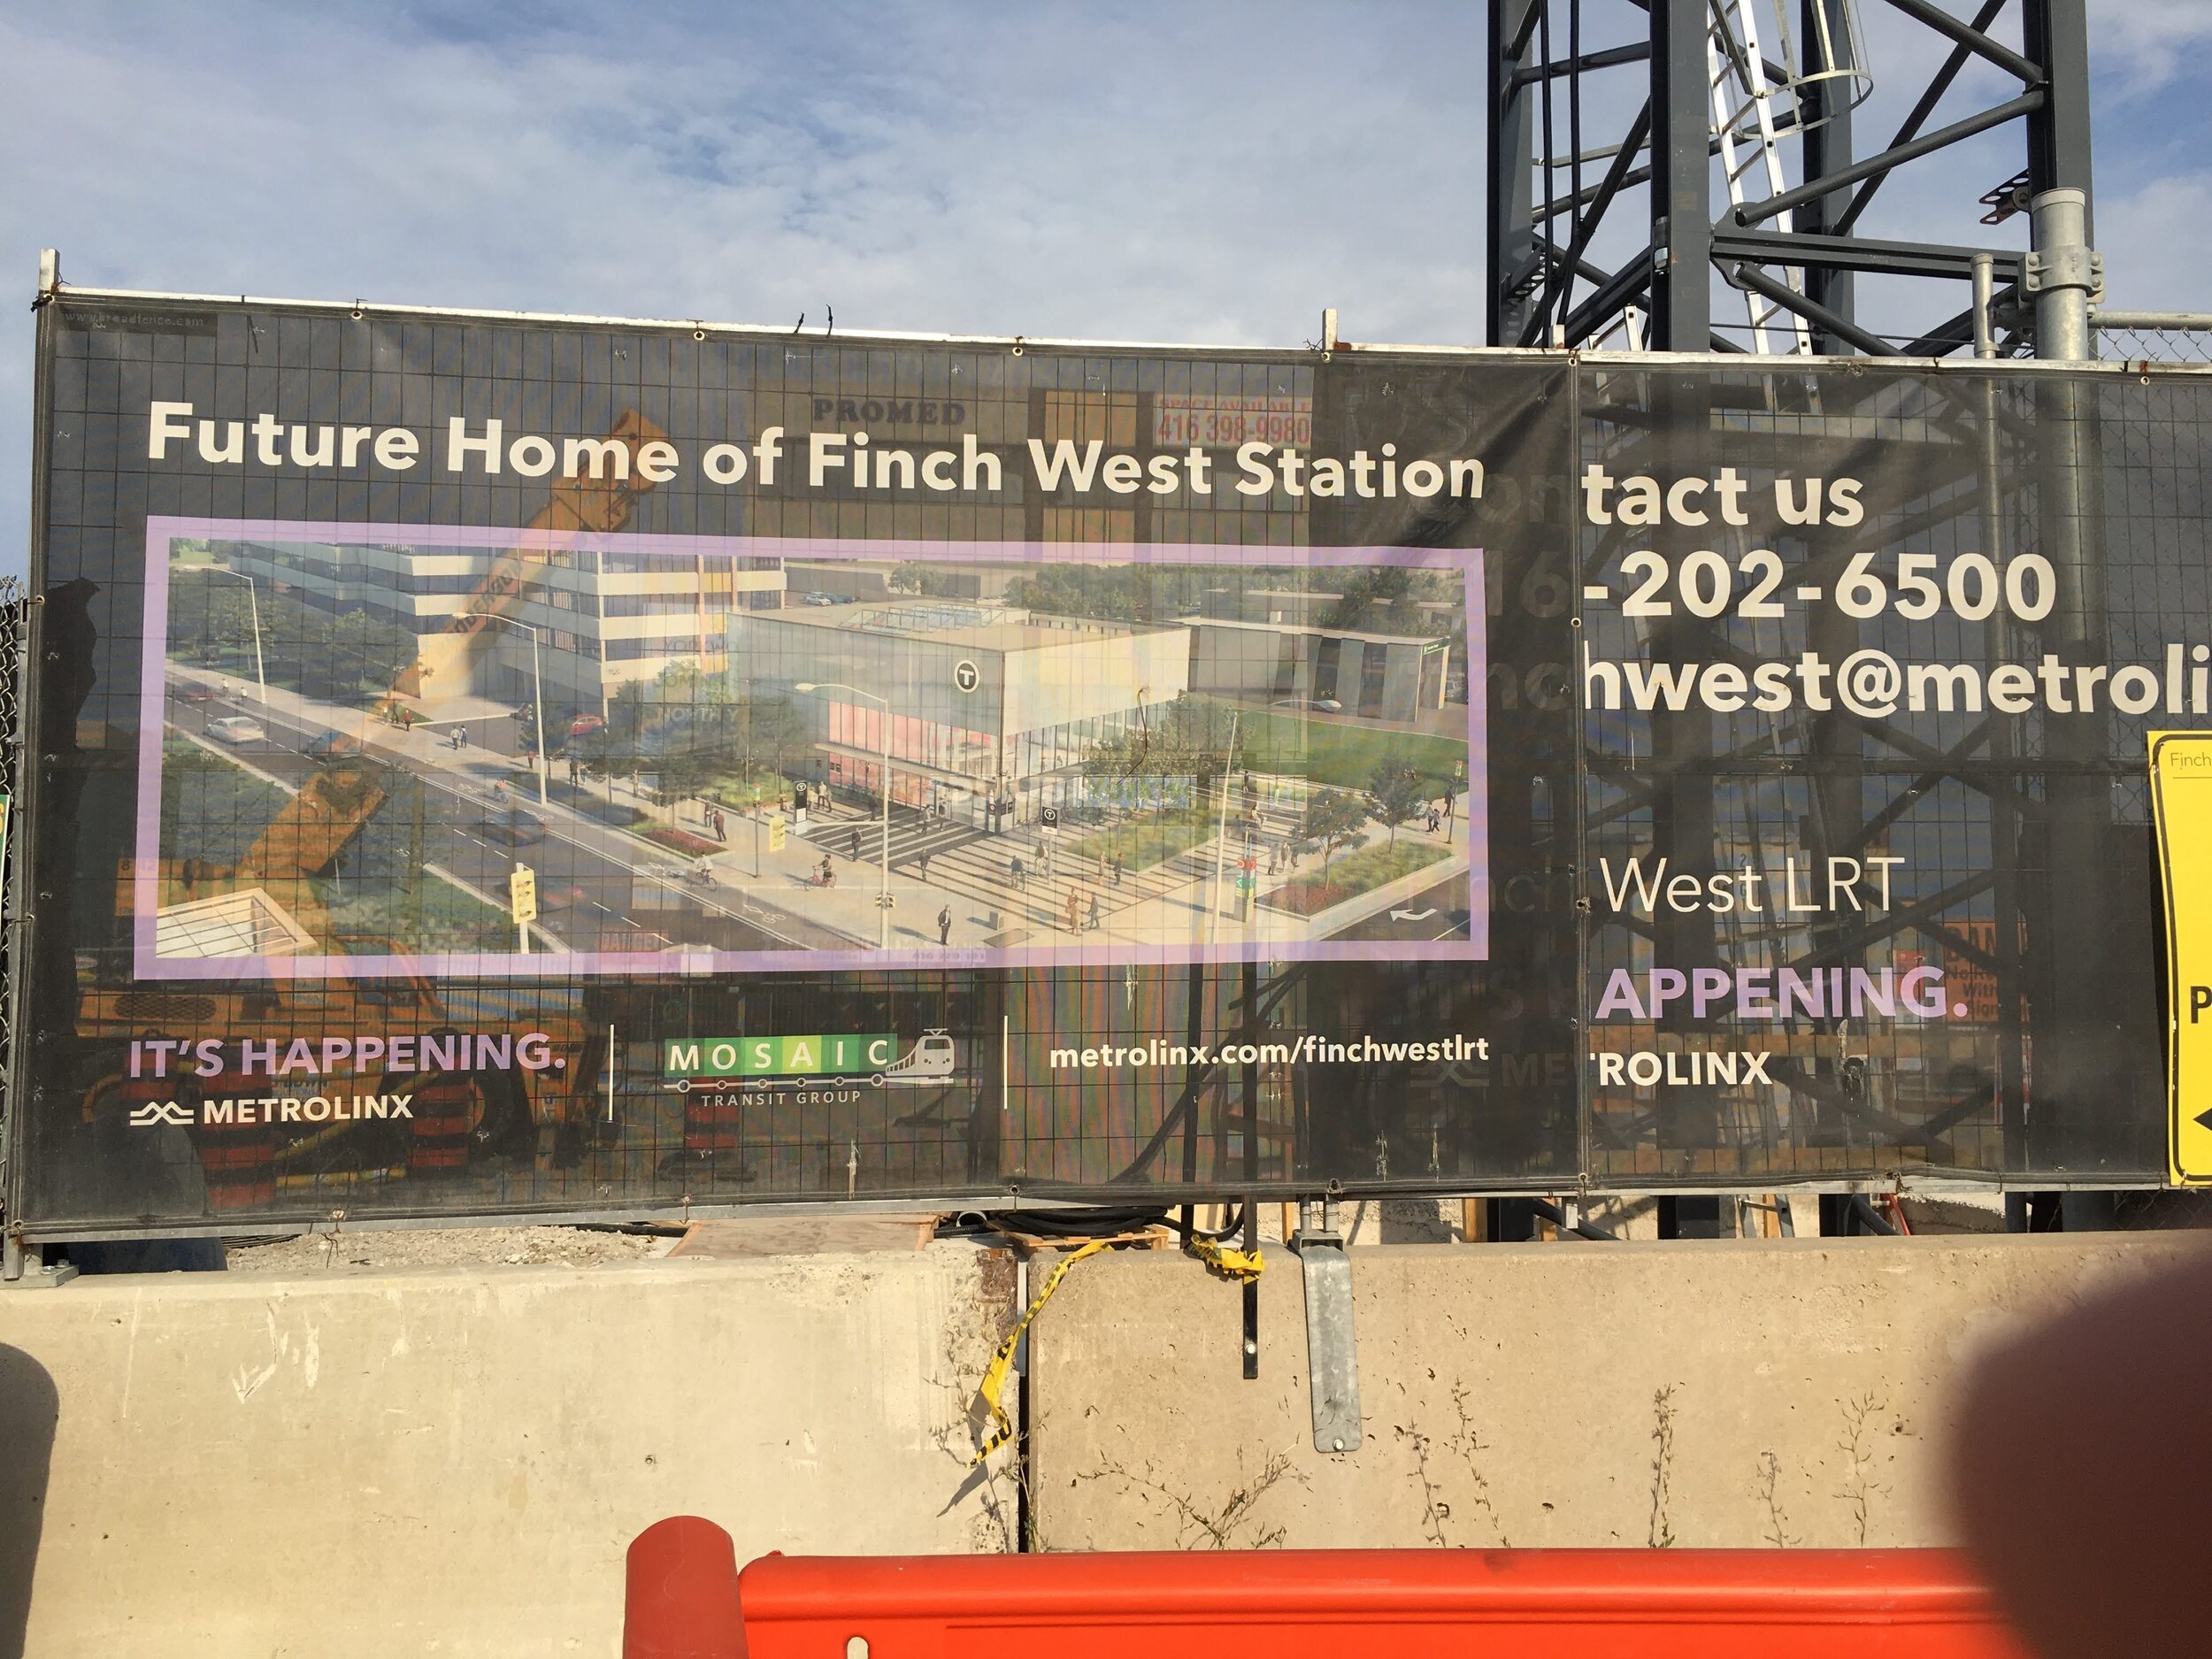 Photo shows the future Finch West Station